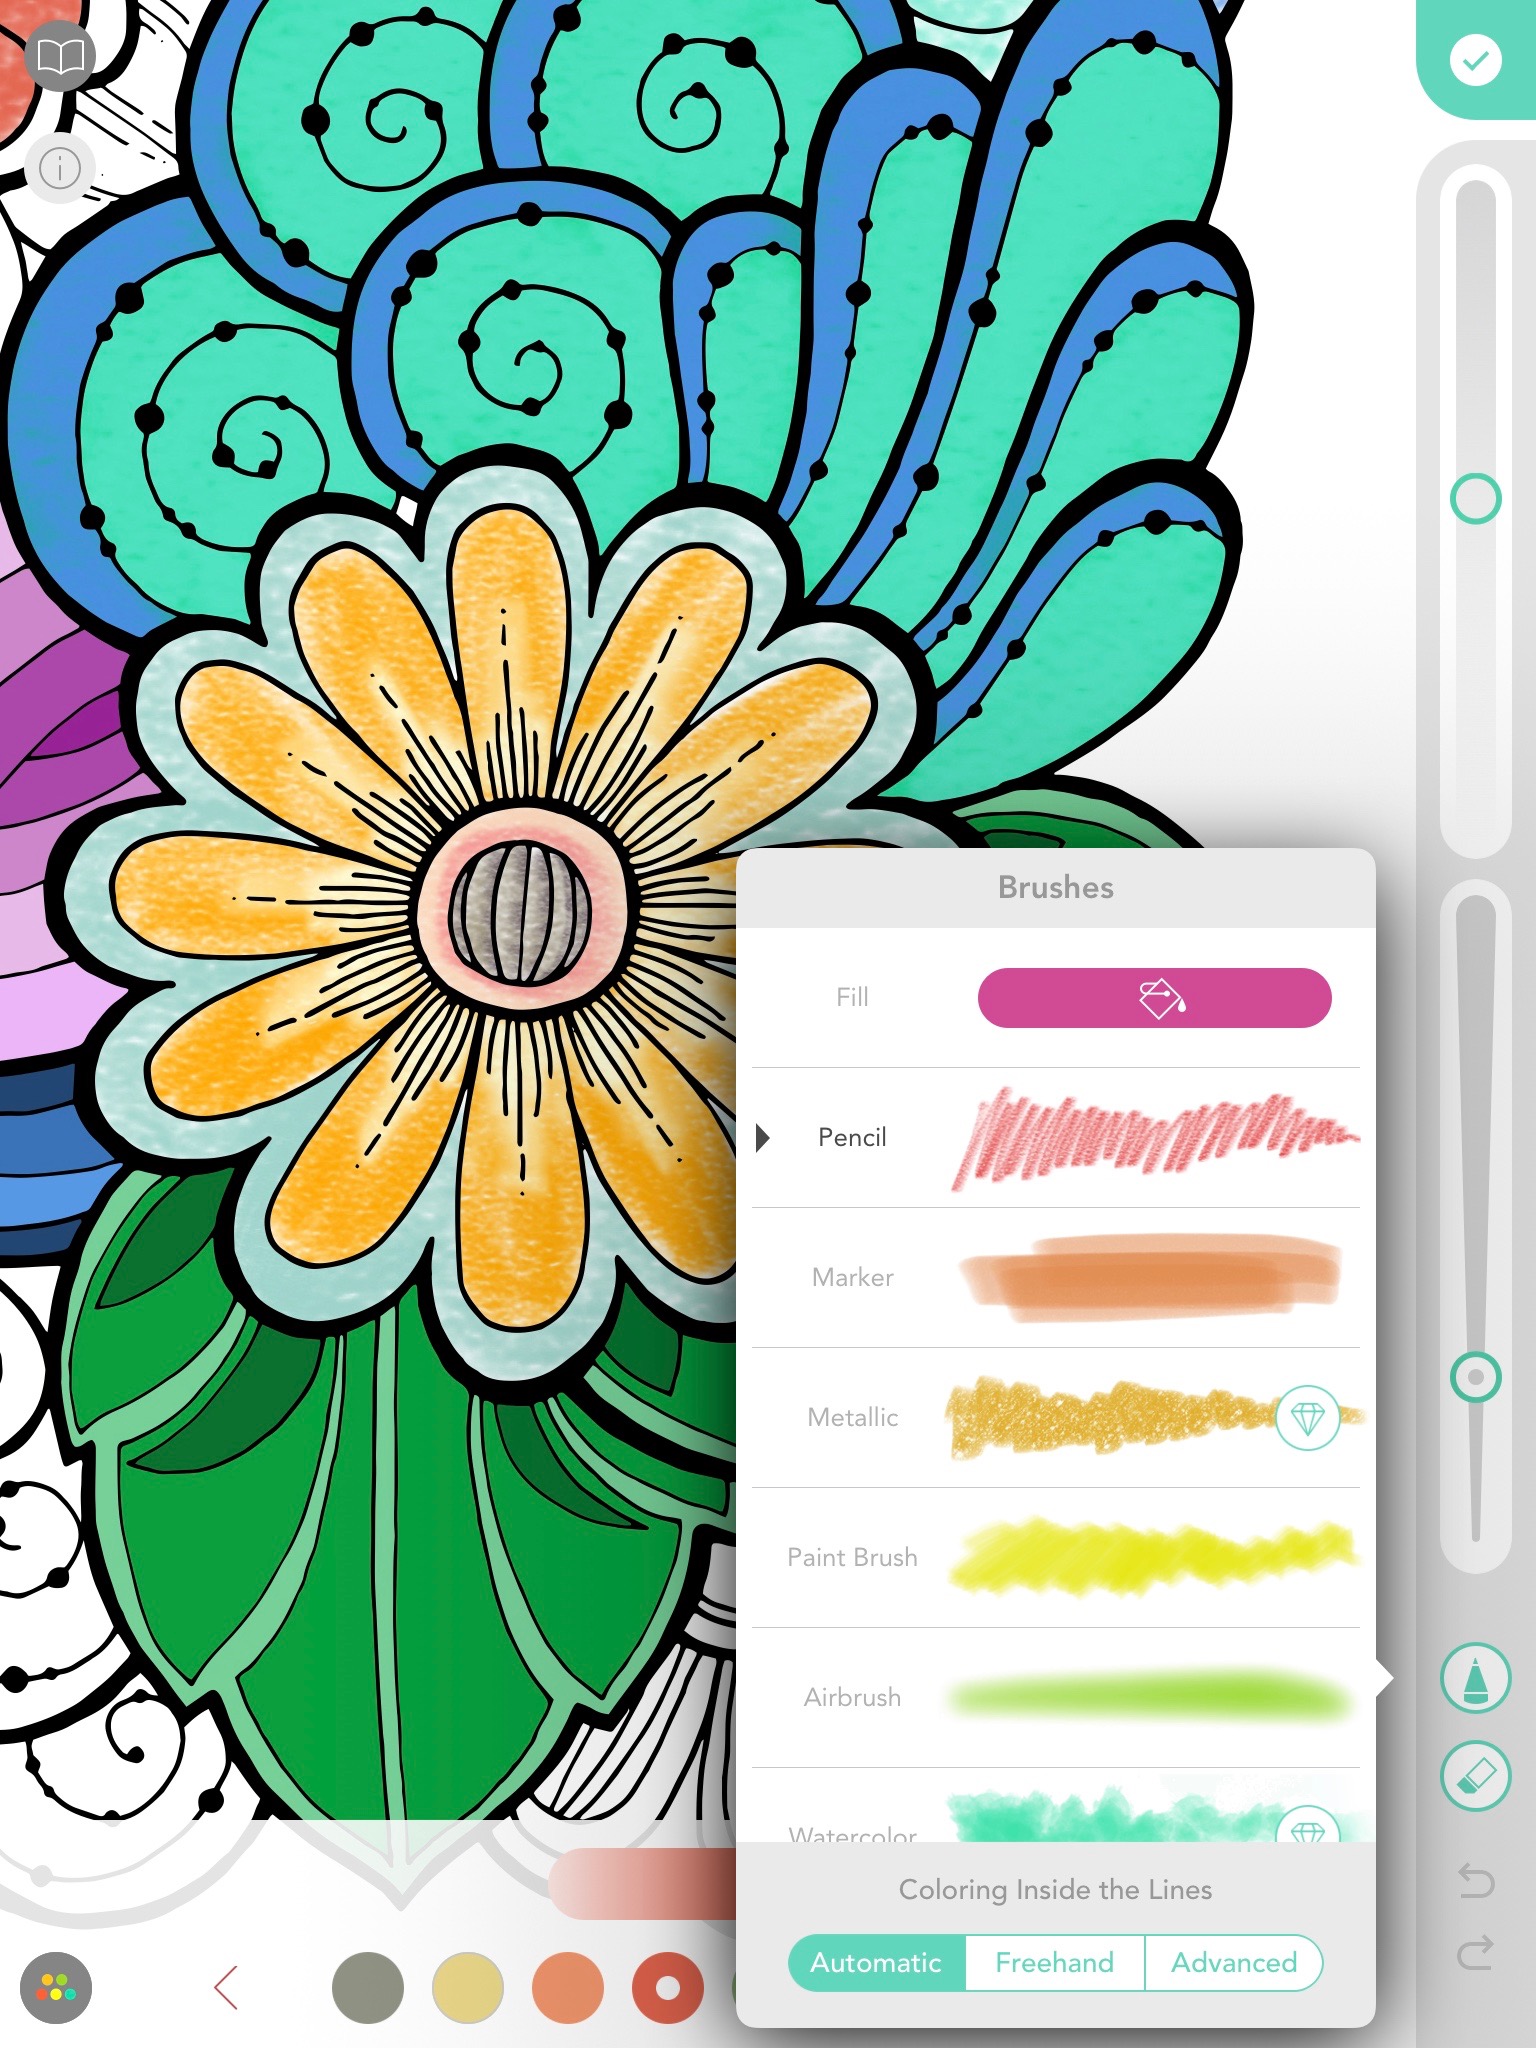 Download Best Coloring Books for Adults on iPad in 2020 | iMore